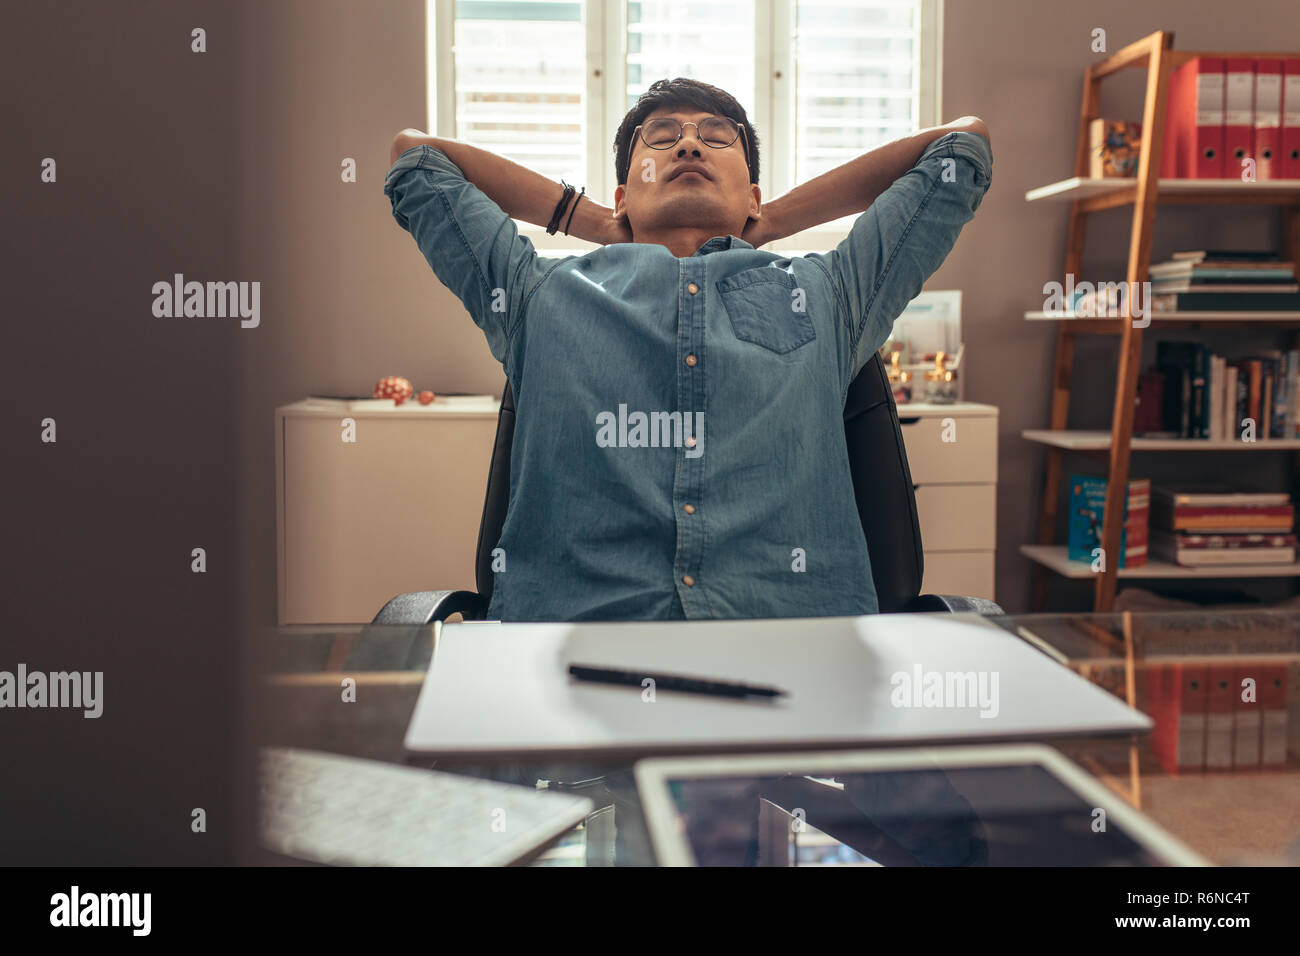 Creative professional sitting at his office, reclining in chair with hands behind head and eyes closed. Designer taking break from work at his desk. Stock Photo